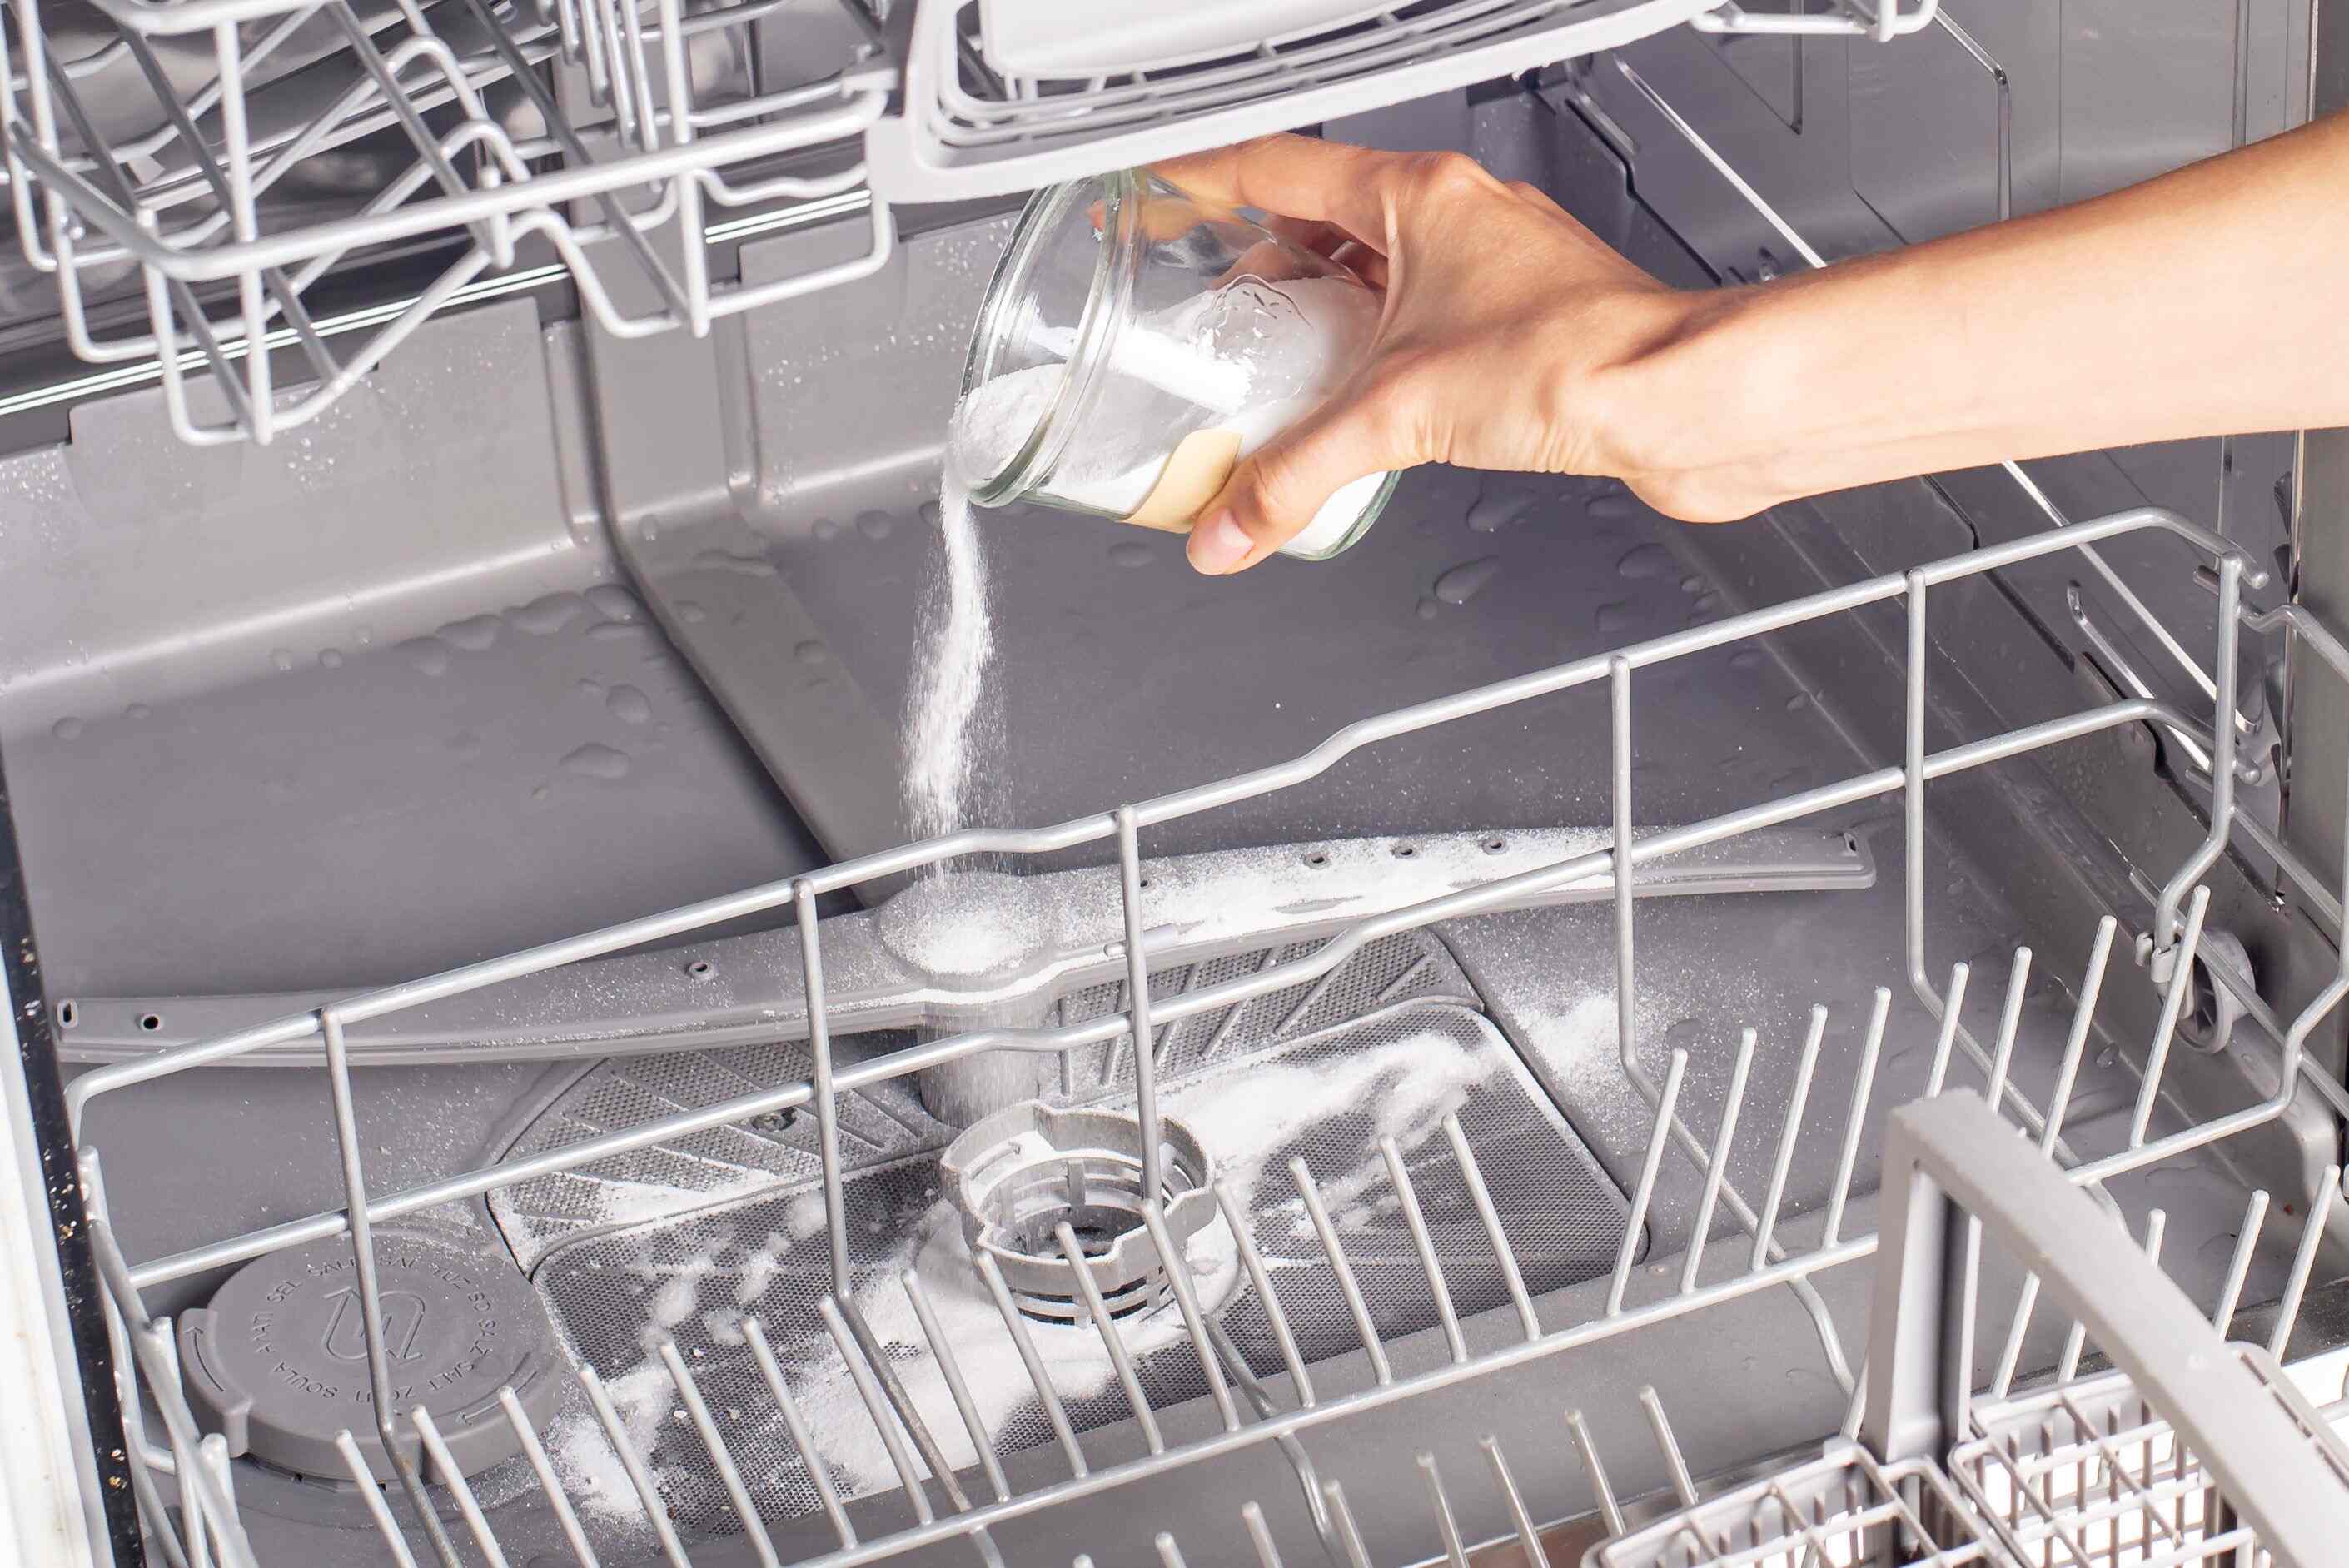 How To Clean A Dishwasher To Remove Buildup And Soap Scum